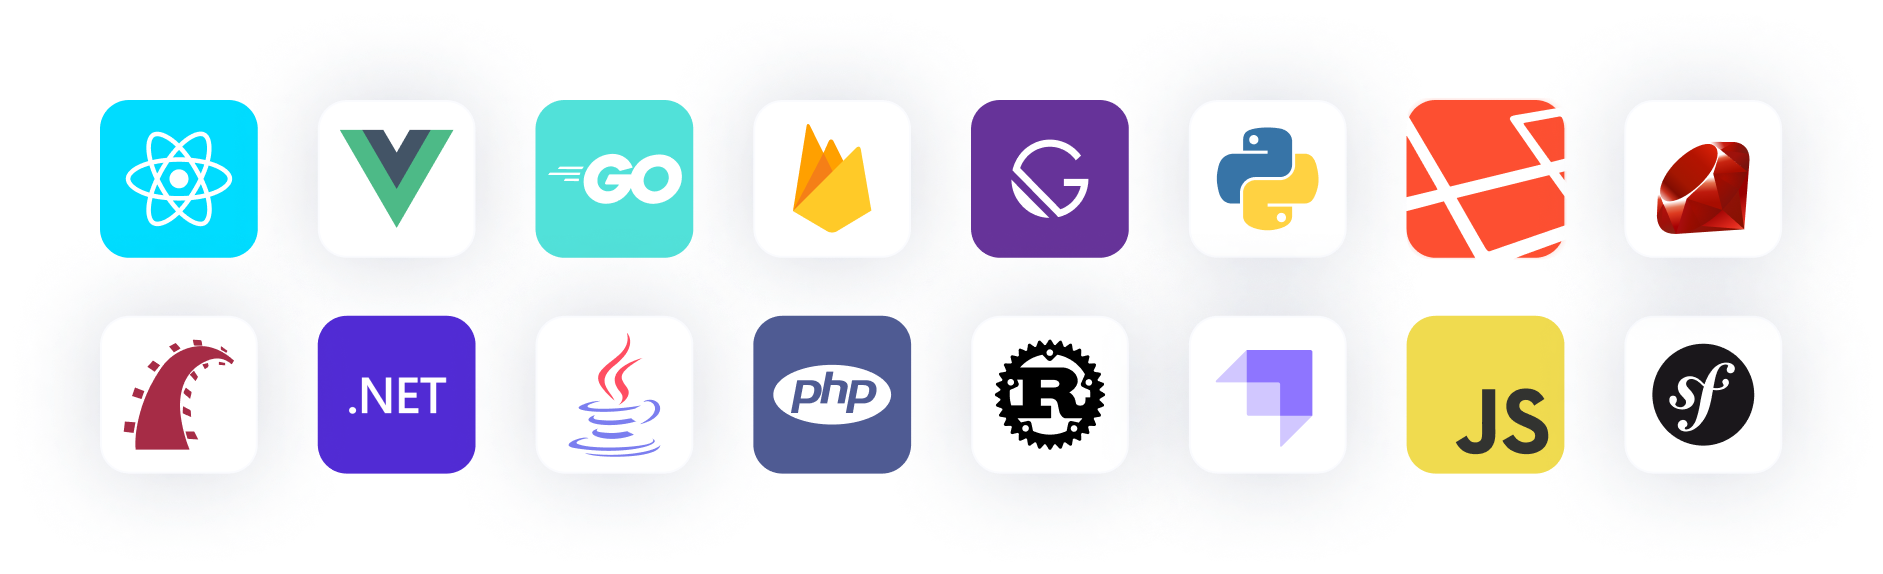 Logos belonging to different languages and frameworks supported by Meilisearch, including React, Ruby on Rails, Go, Rust, and PHP